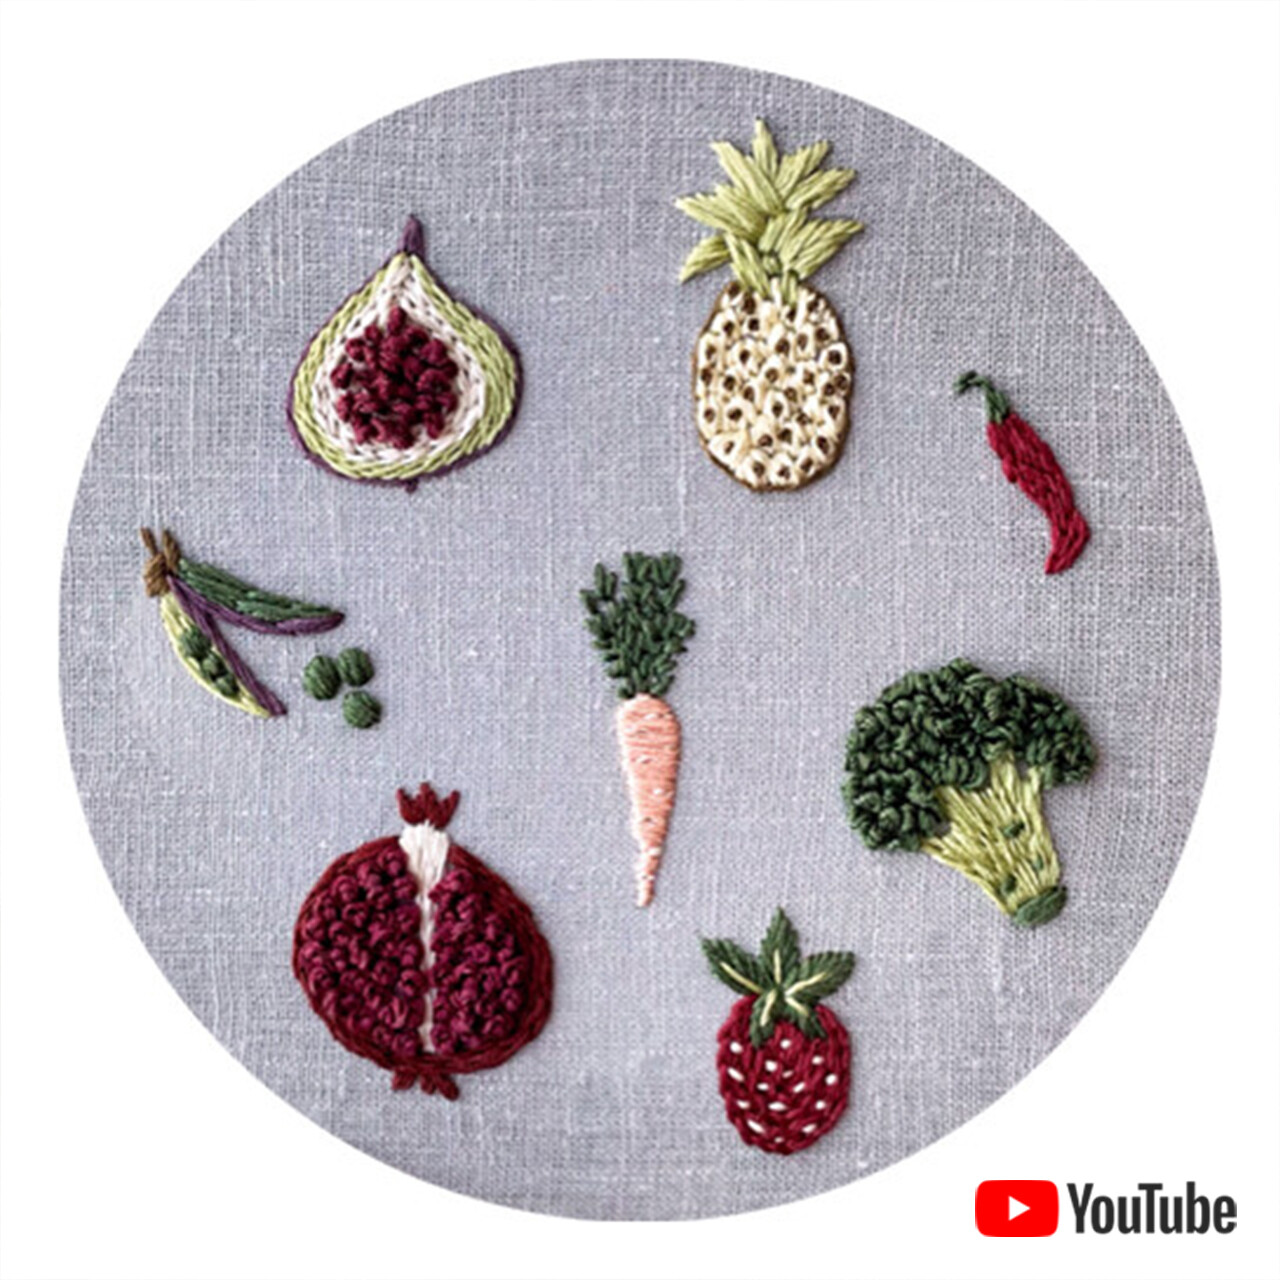 "Fruits and vegetables 1" pdf pattern 20 cm ( 8") + video tutorial